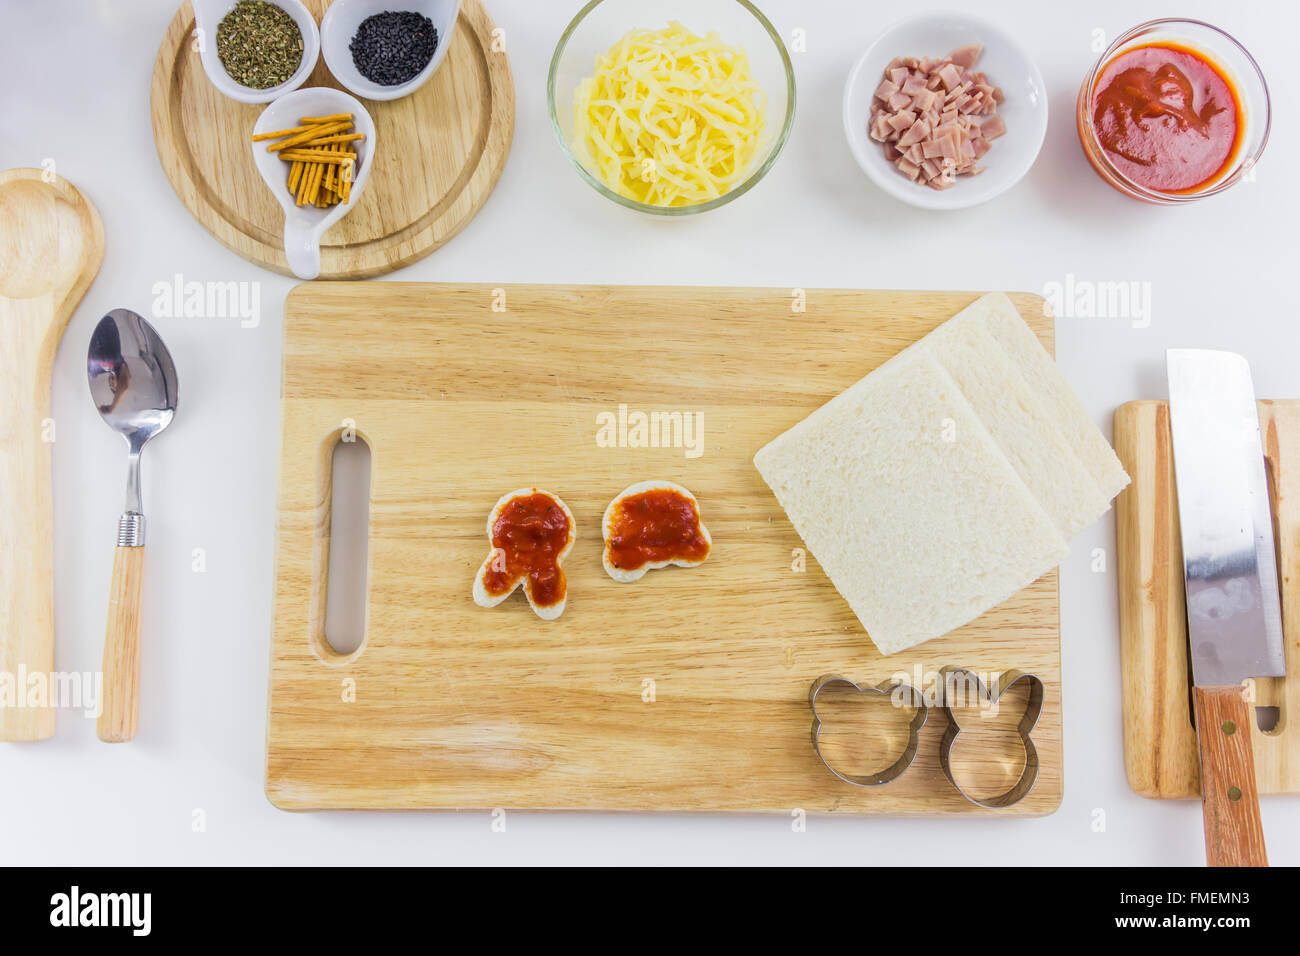 Ingredients for cooking pizza cartoon on wooden table, top view Stock Photo